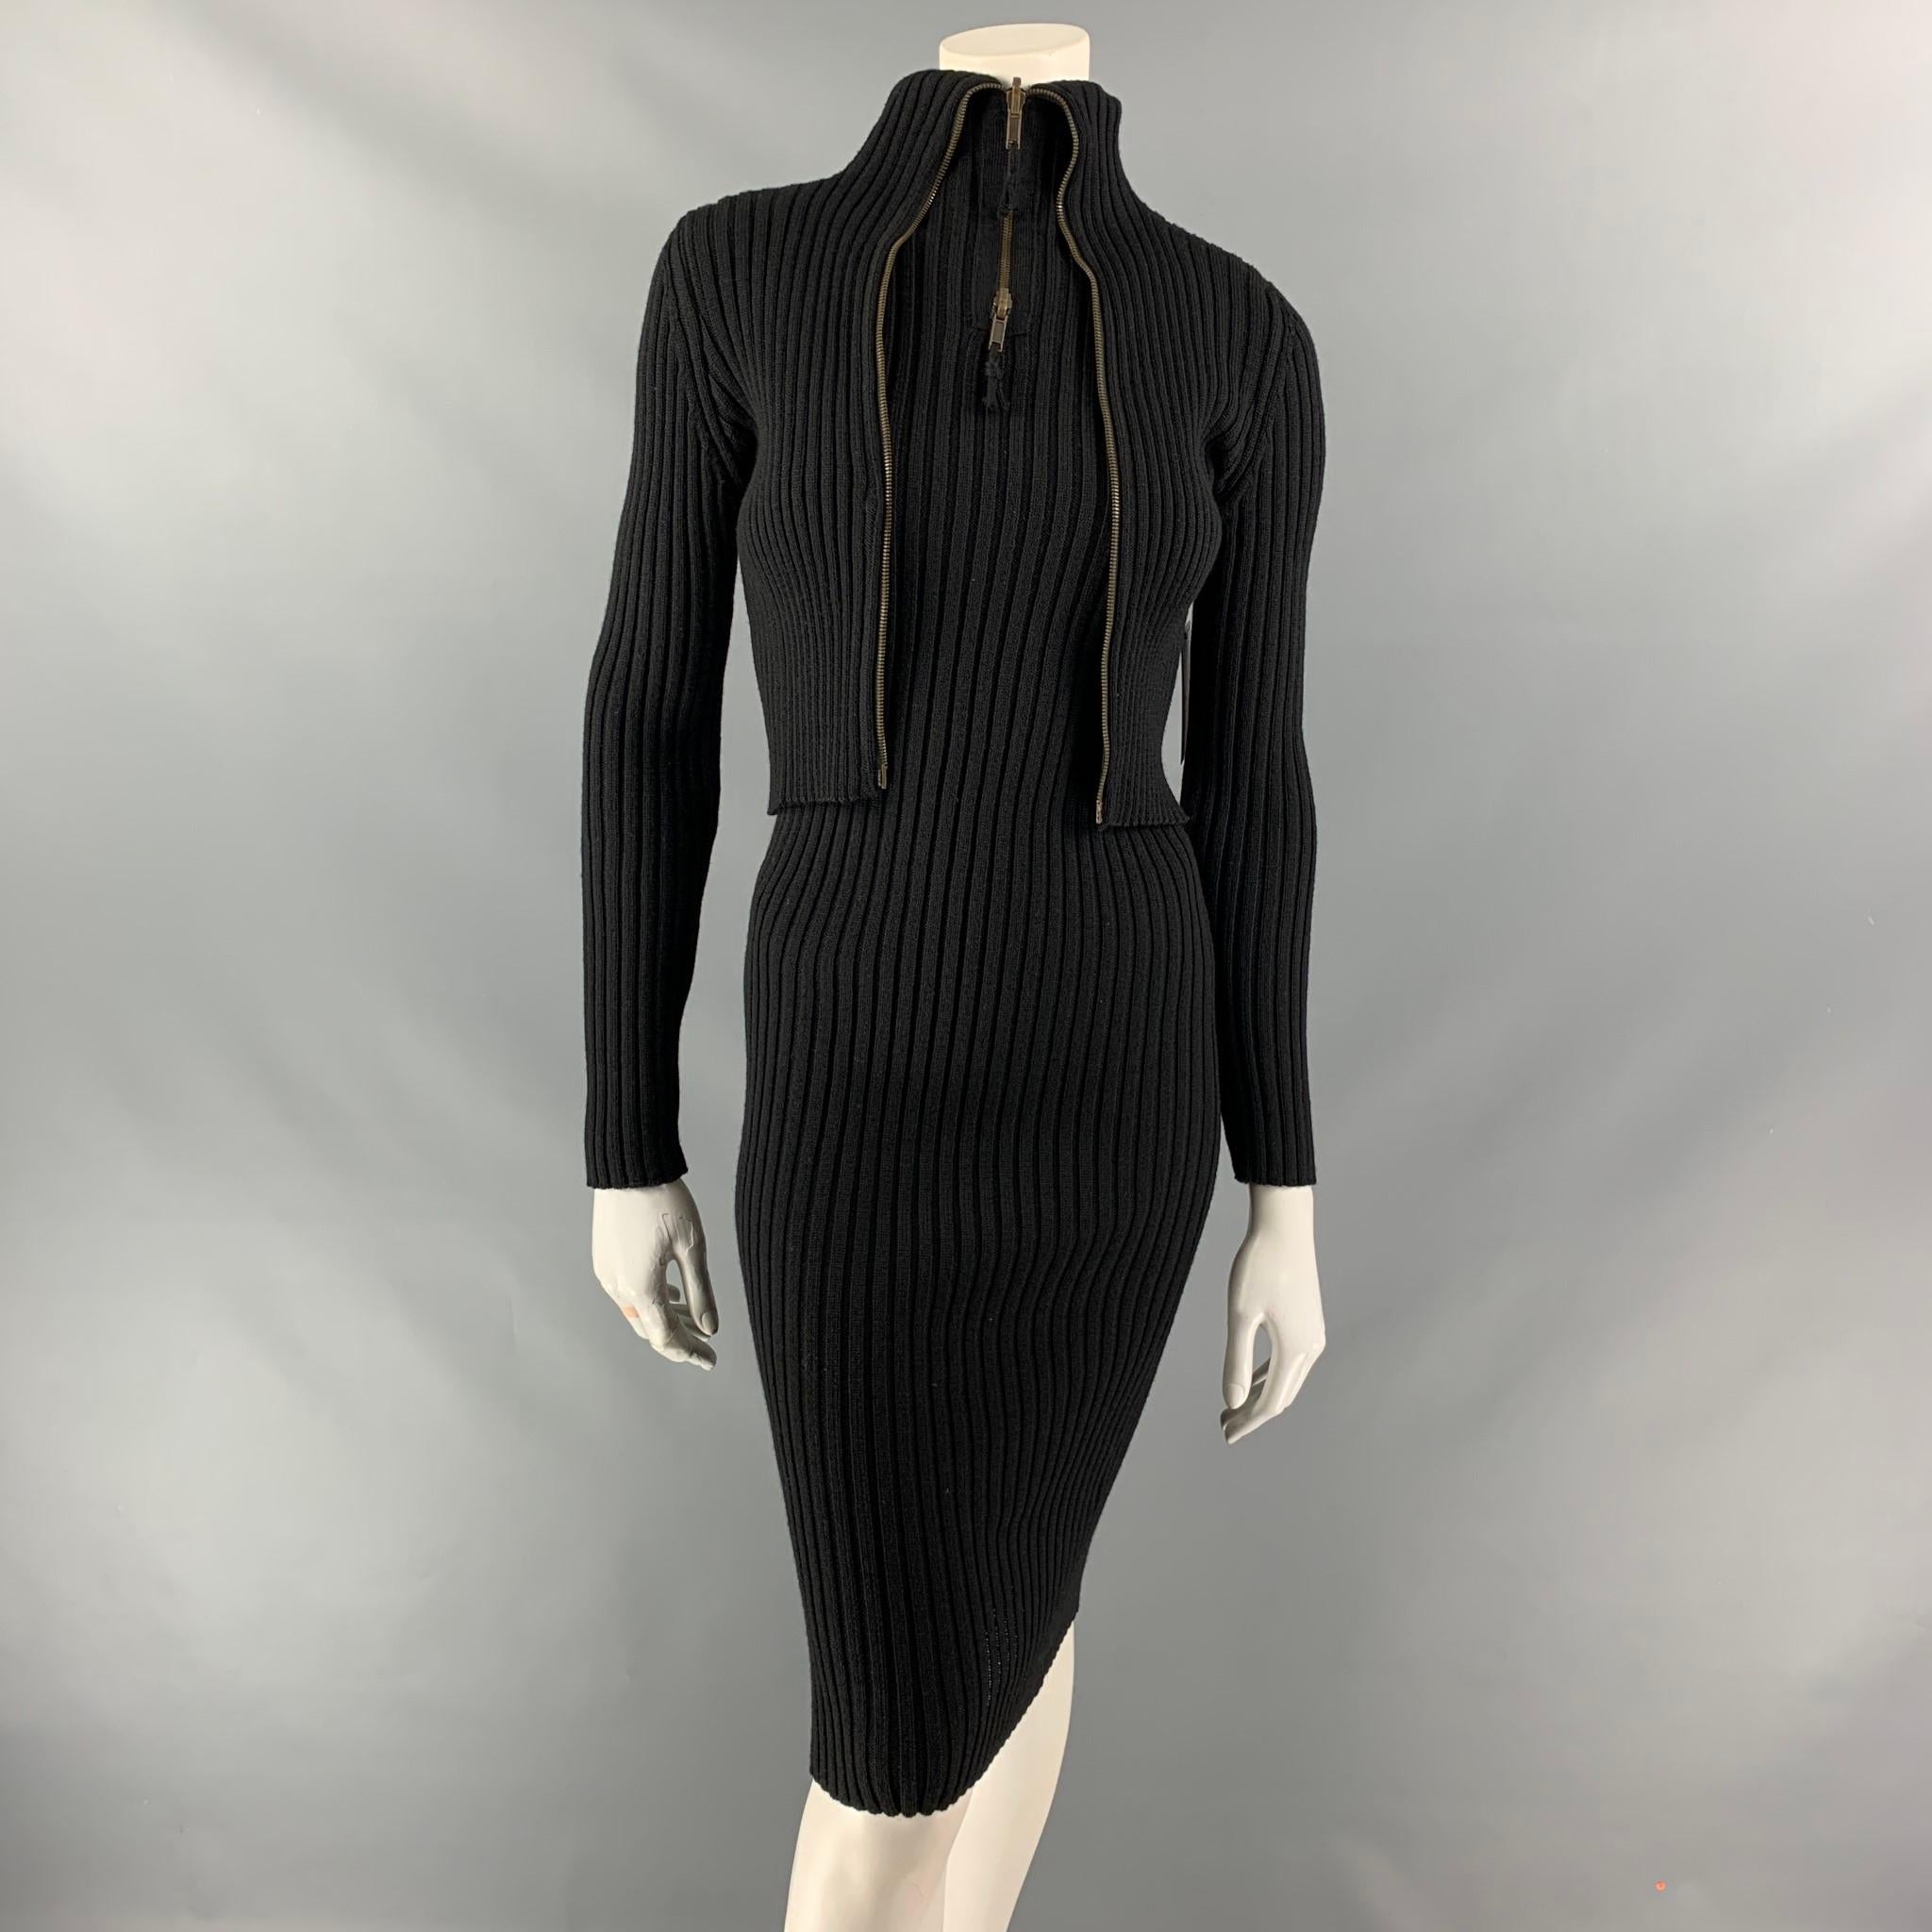 VINTAGE JEAN PAUL GAULTIER classique long sleeve midi bodycon stretch dress comes in black ribbed knit wool featuring an attached jacket and full zip at front. Made Italy.

Very Good Pre-Owned Condition. Minor repaired at back.
Marked: